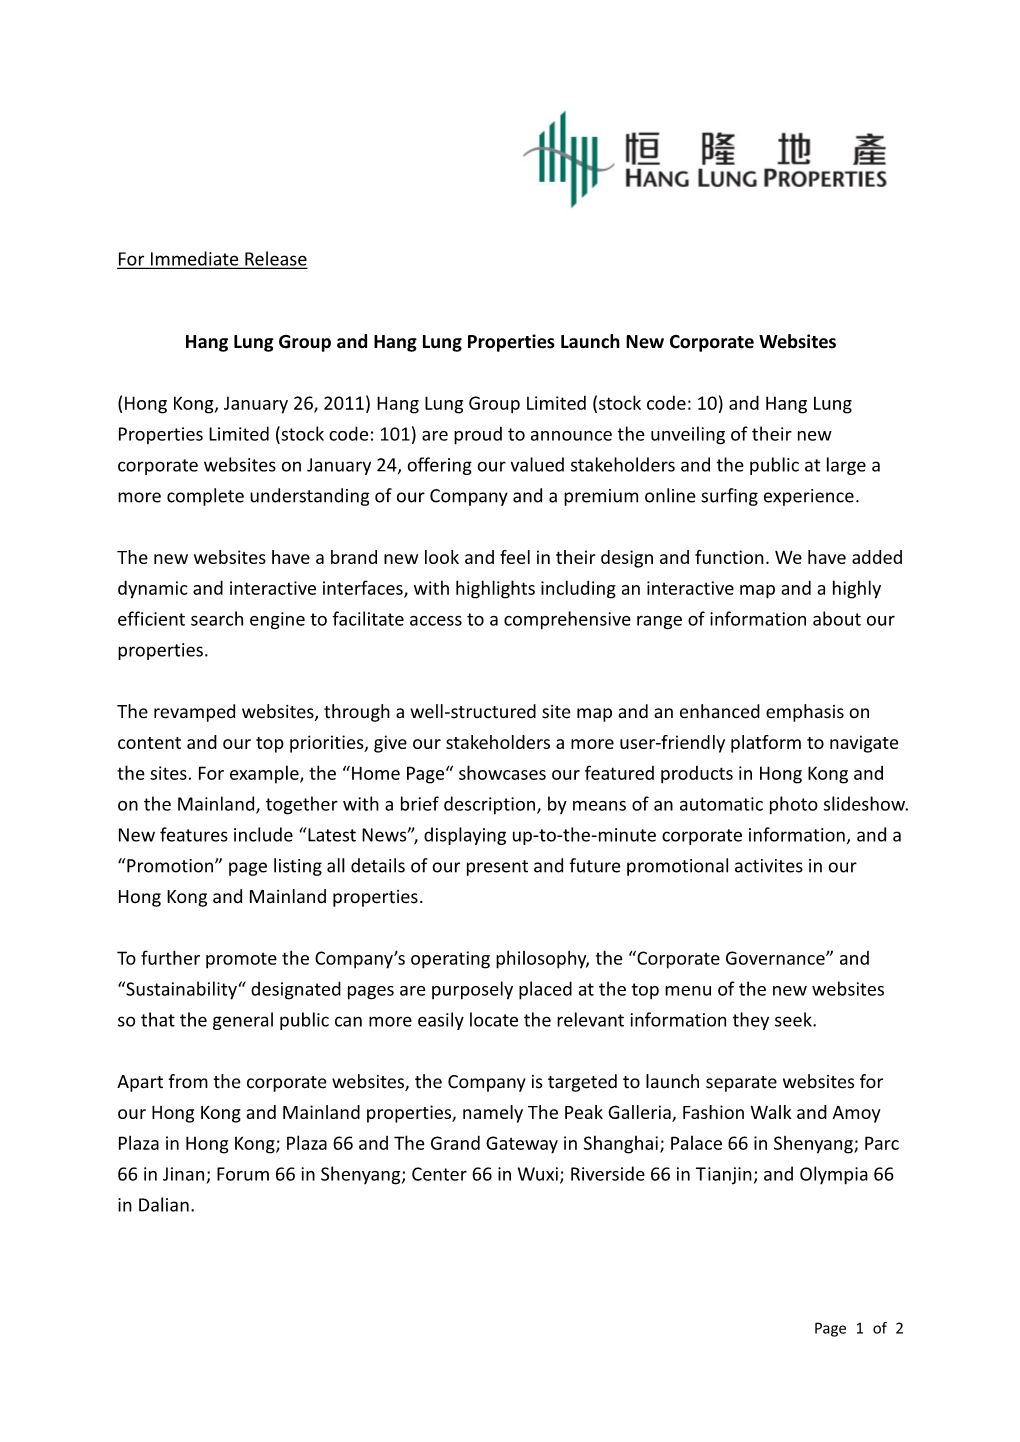 For Immediate Release Hang Lung Group and Hang Lung